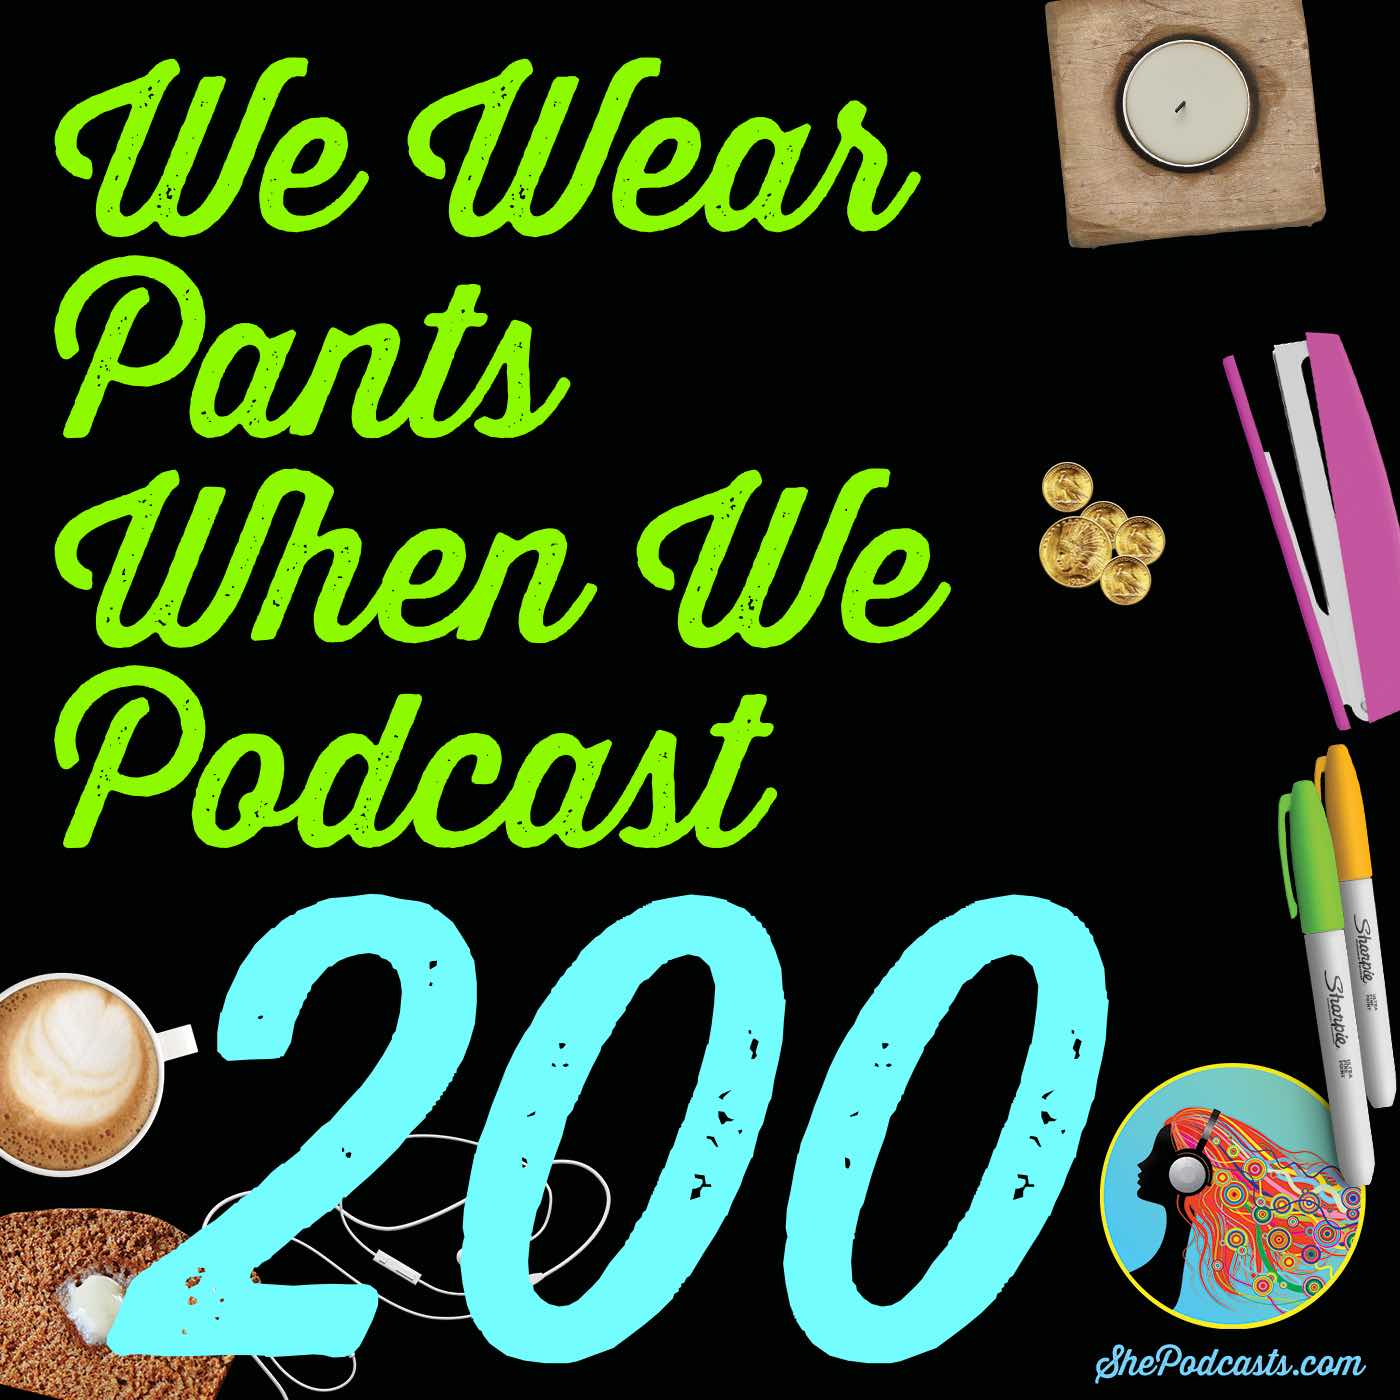 200 We Wear Pants When We Podcast